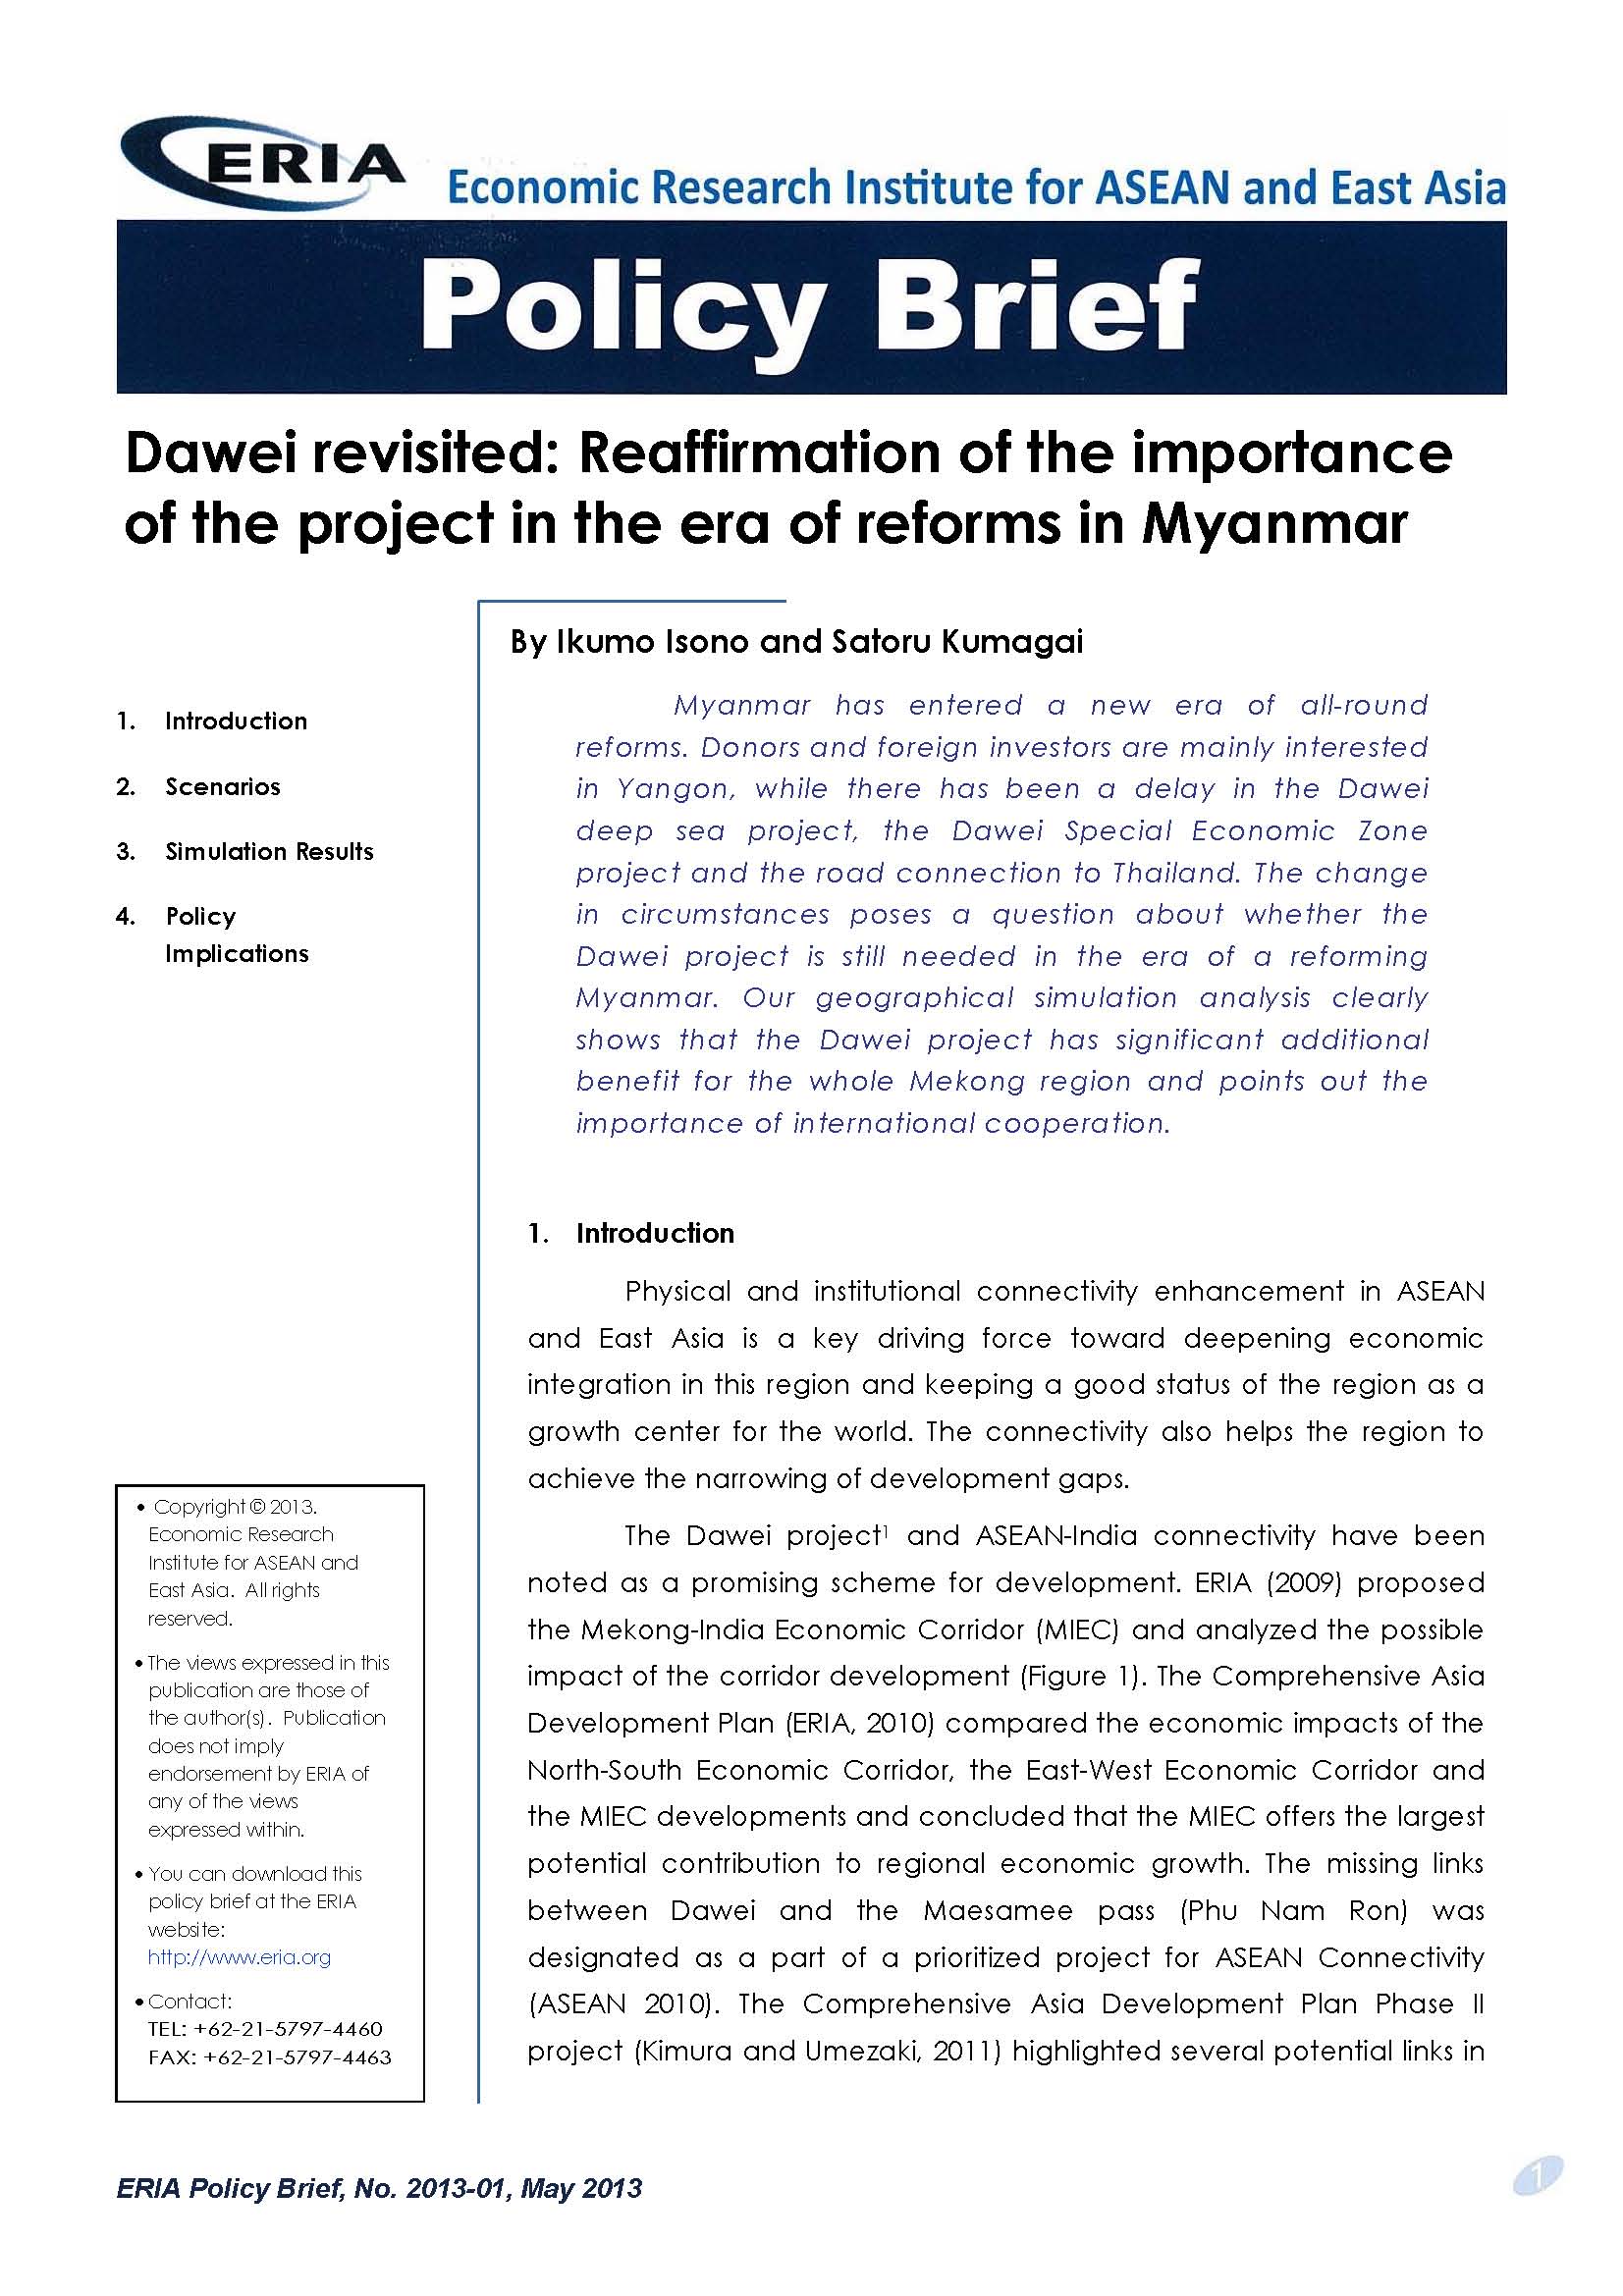 Dawei Revisited: Reaffirmation of the importance of the project in the era of reforms in Myanmar